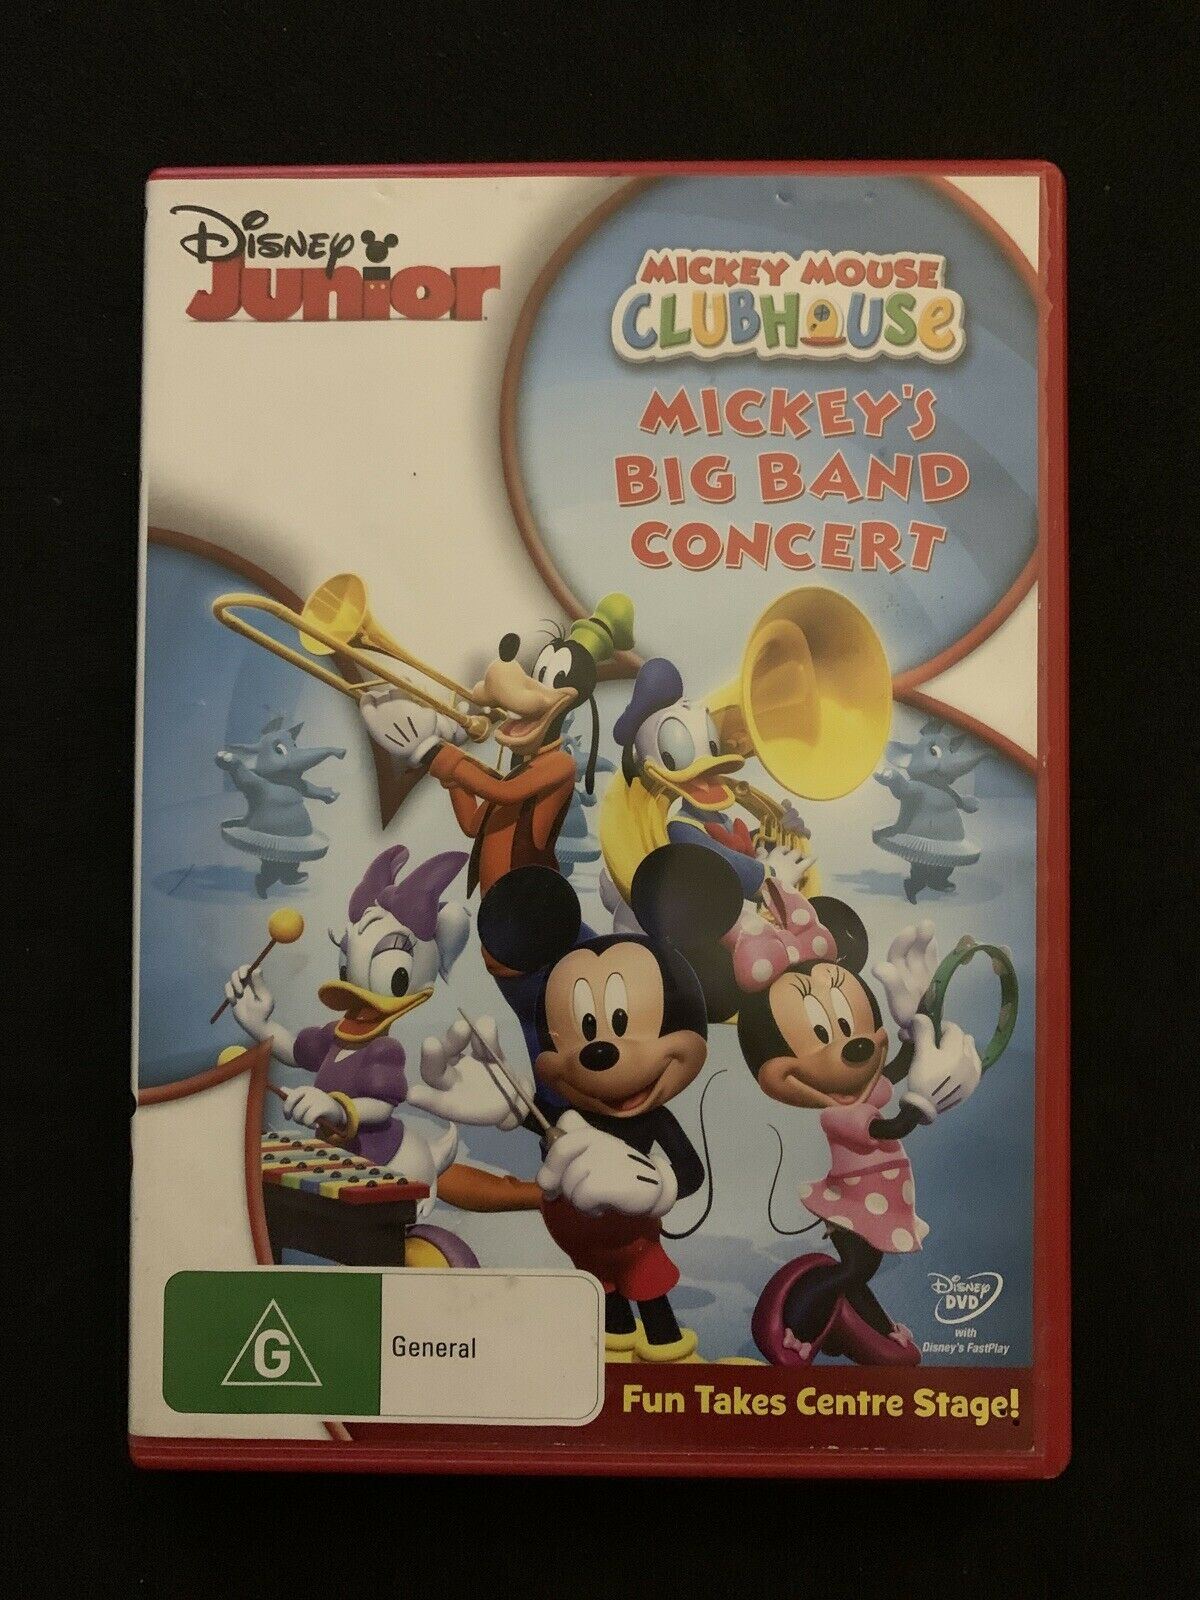 Mickey Mouse Clubhouse - Big Band Concert (DVD) Region 4